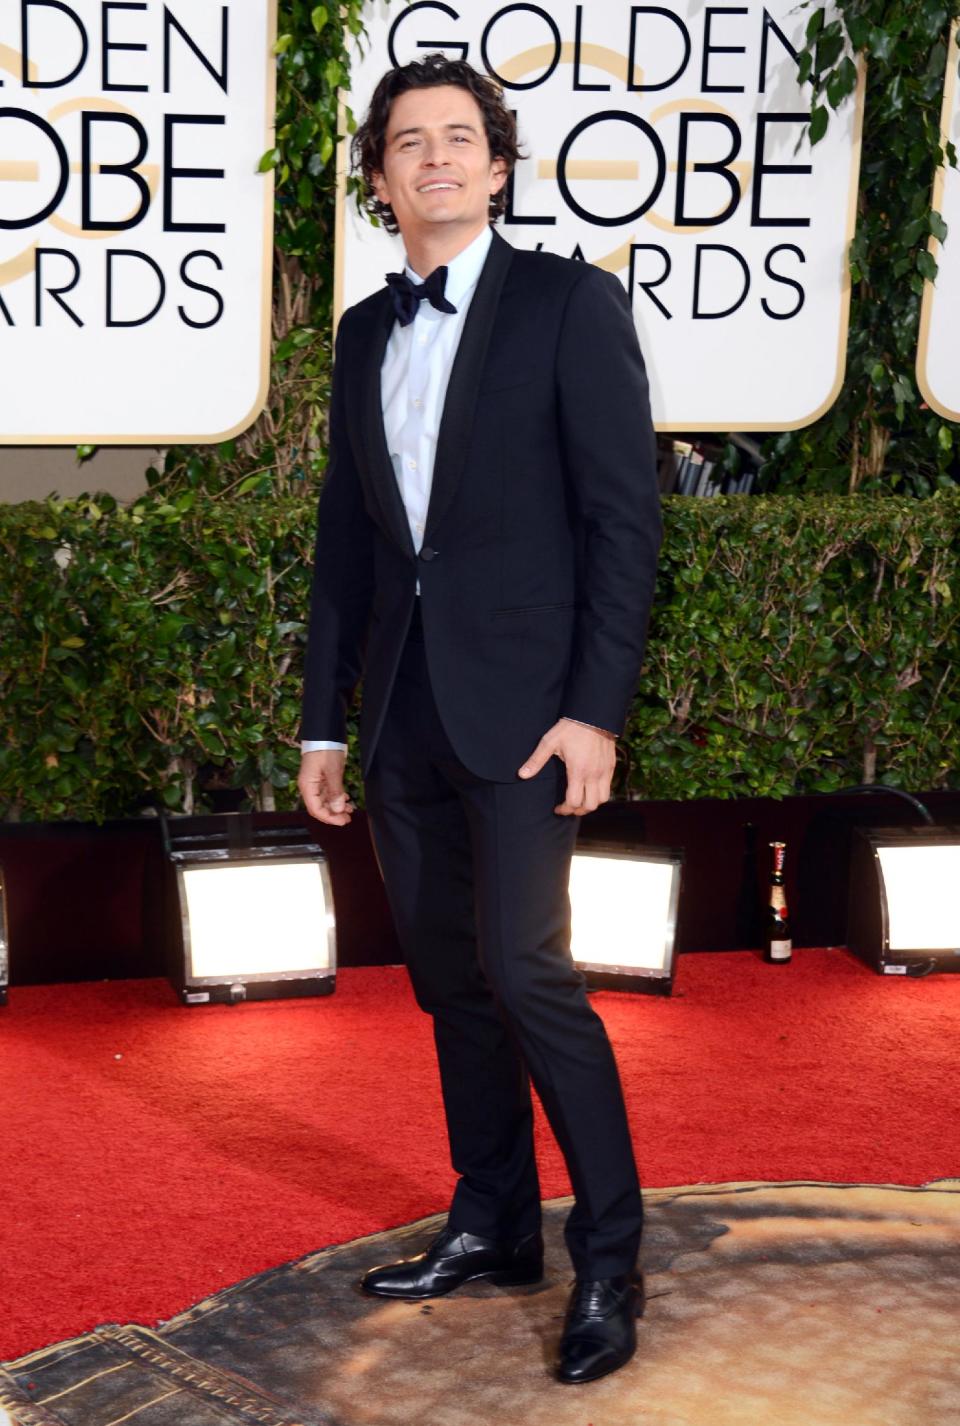 Orlando Bloom arrives at the 71st annual Golden Globe Awards at the Beverly Hilton Hotel on Sunday, Jan. 12, 2014, in Beverly Hills, Calif. (Photo by Jordan Strauss/Invision/AP)